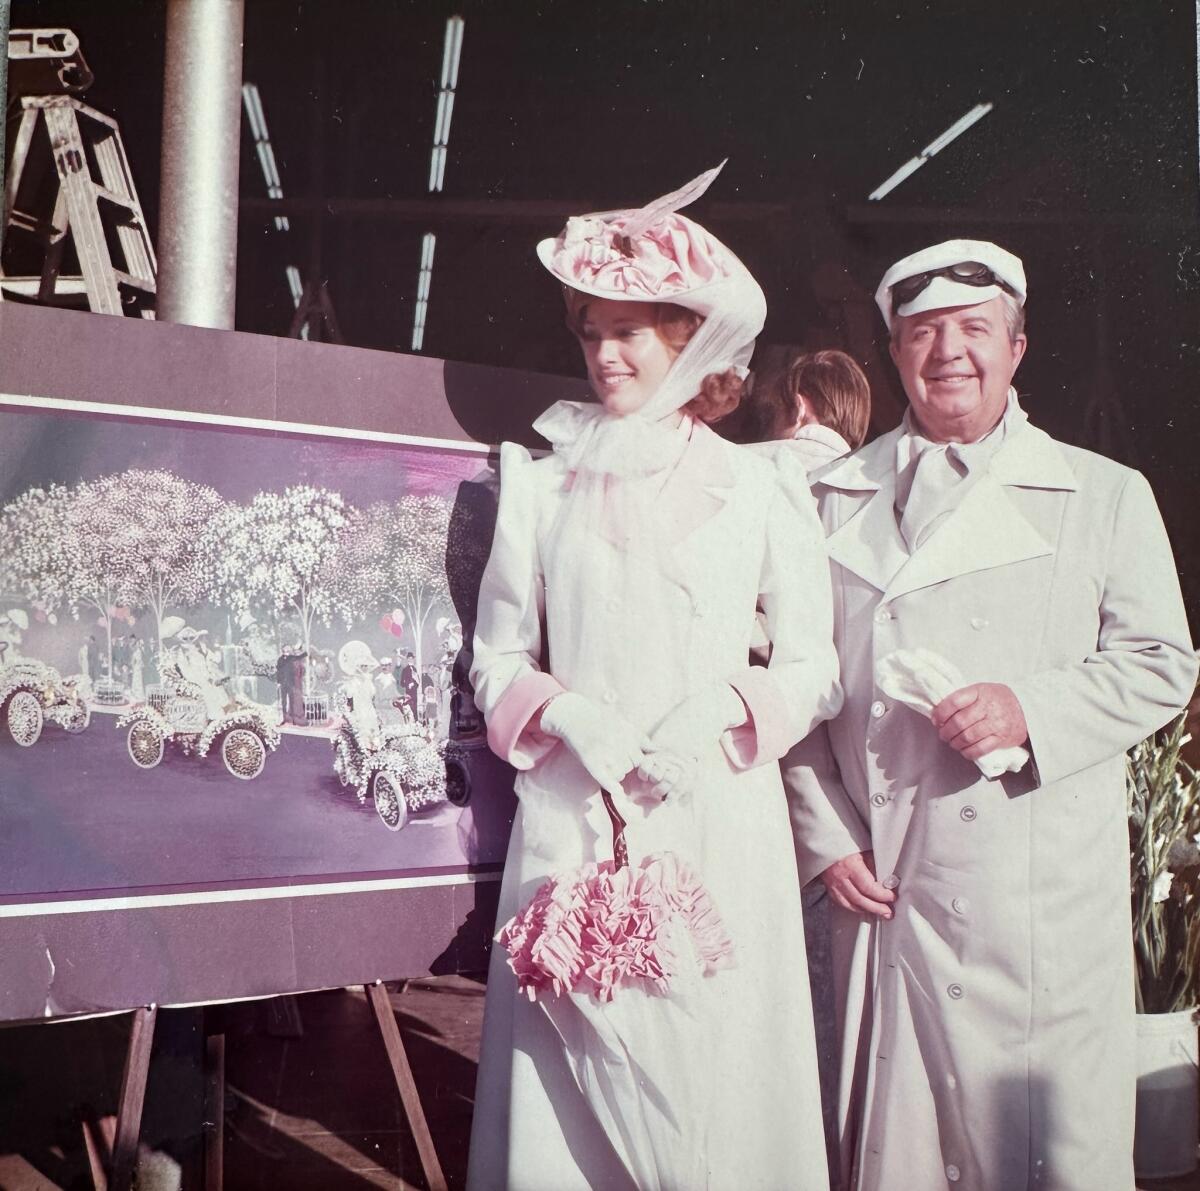 Robin Carr Sanders, left, prepares to ride on the Occidental Life Insurance Company float in 1976.